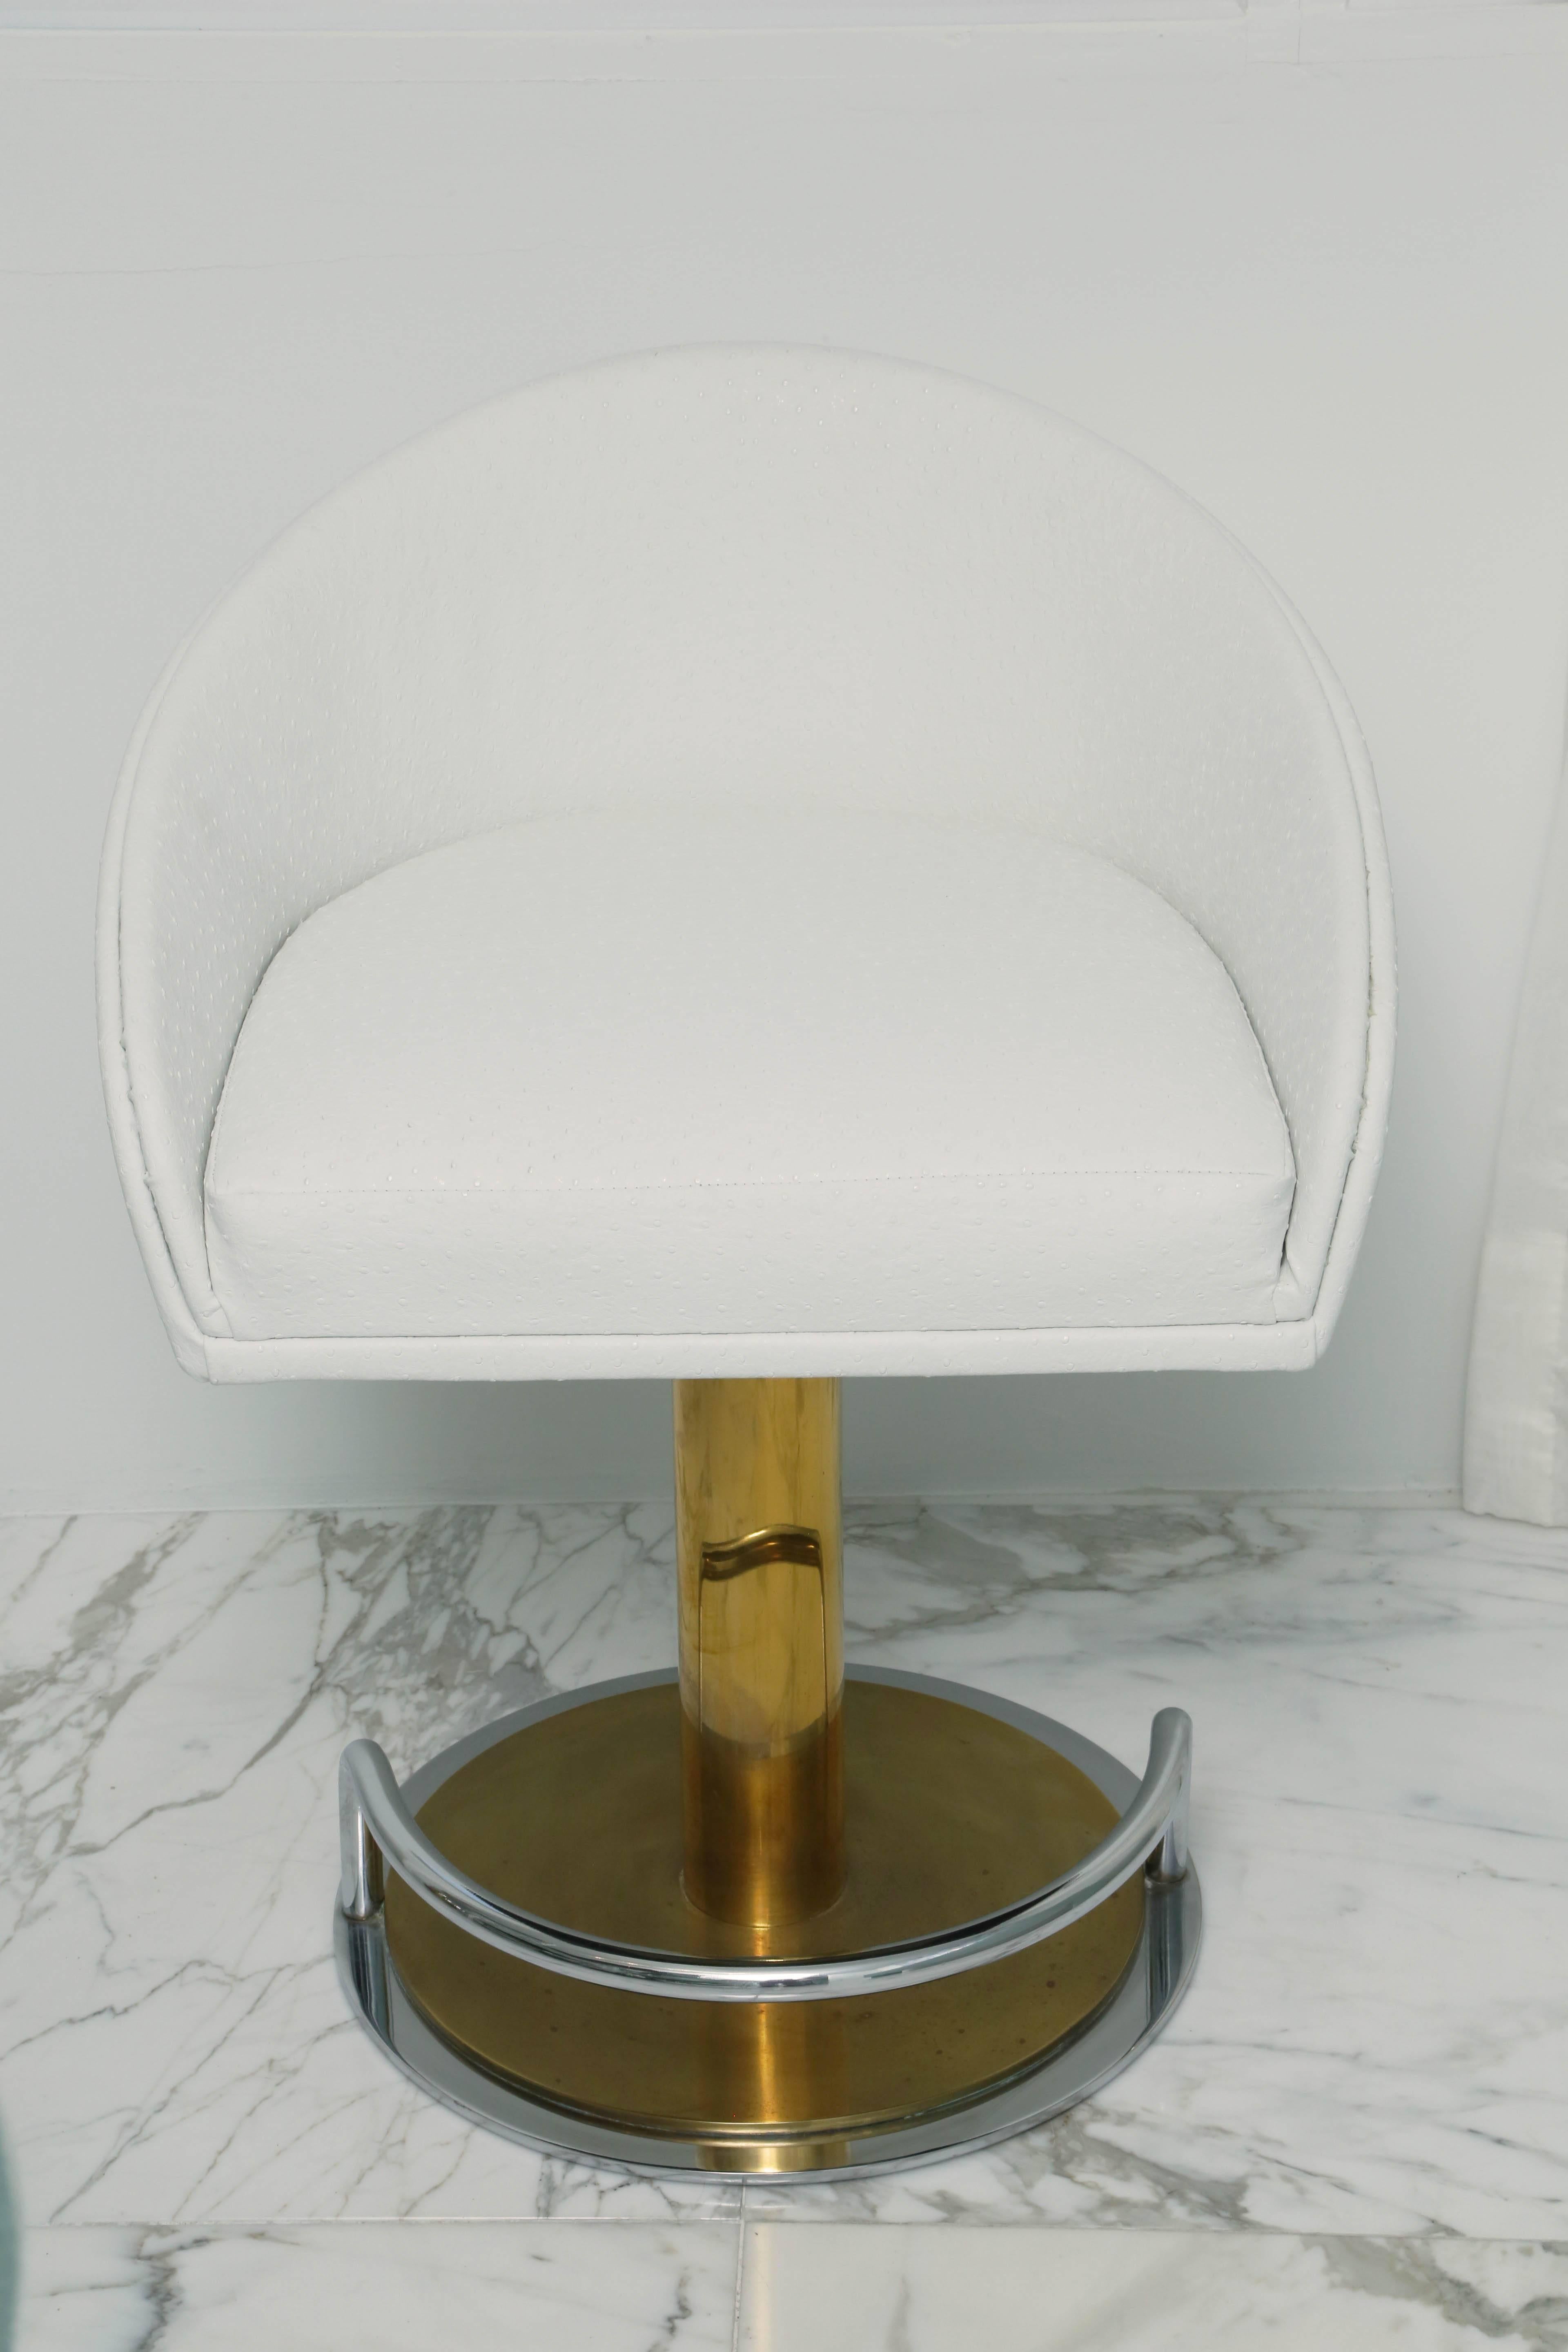 Each newly upholstered in white faux ostrich leather; each swivel seat raised on a gold-toned metal columnar support on a round base with foot support.